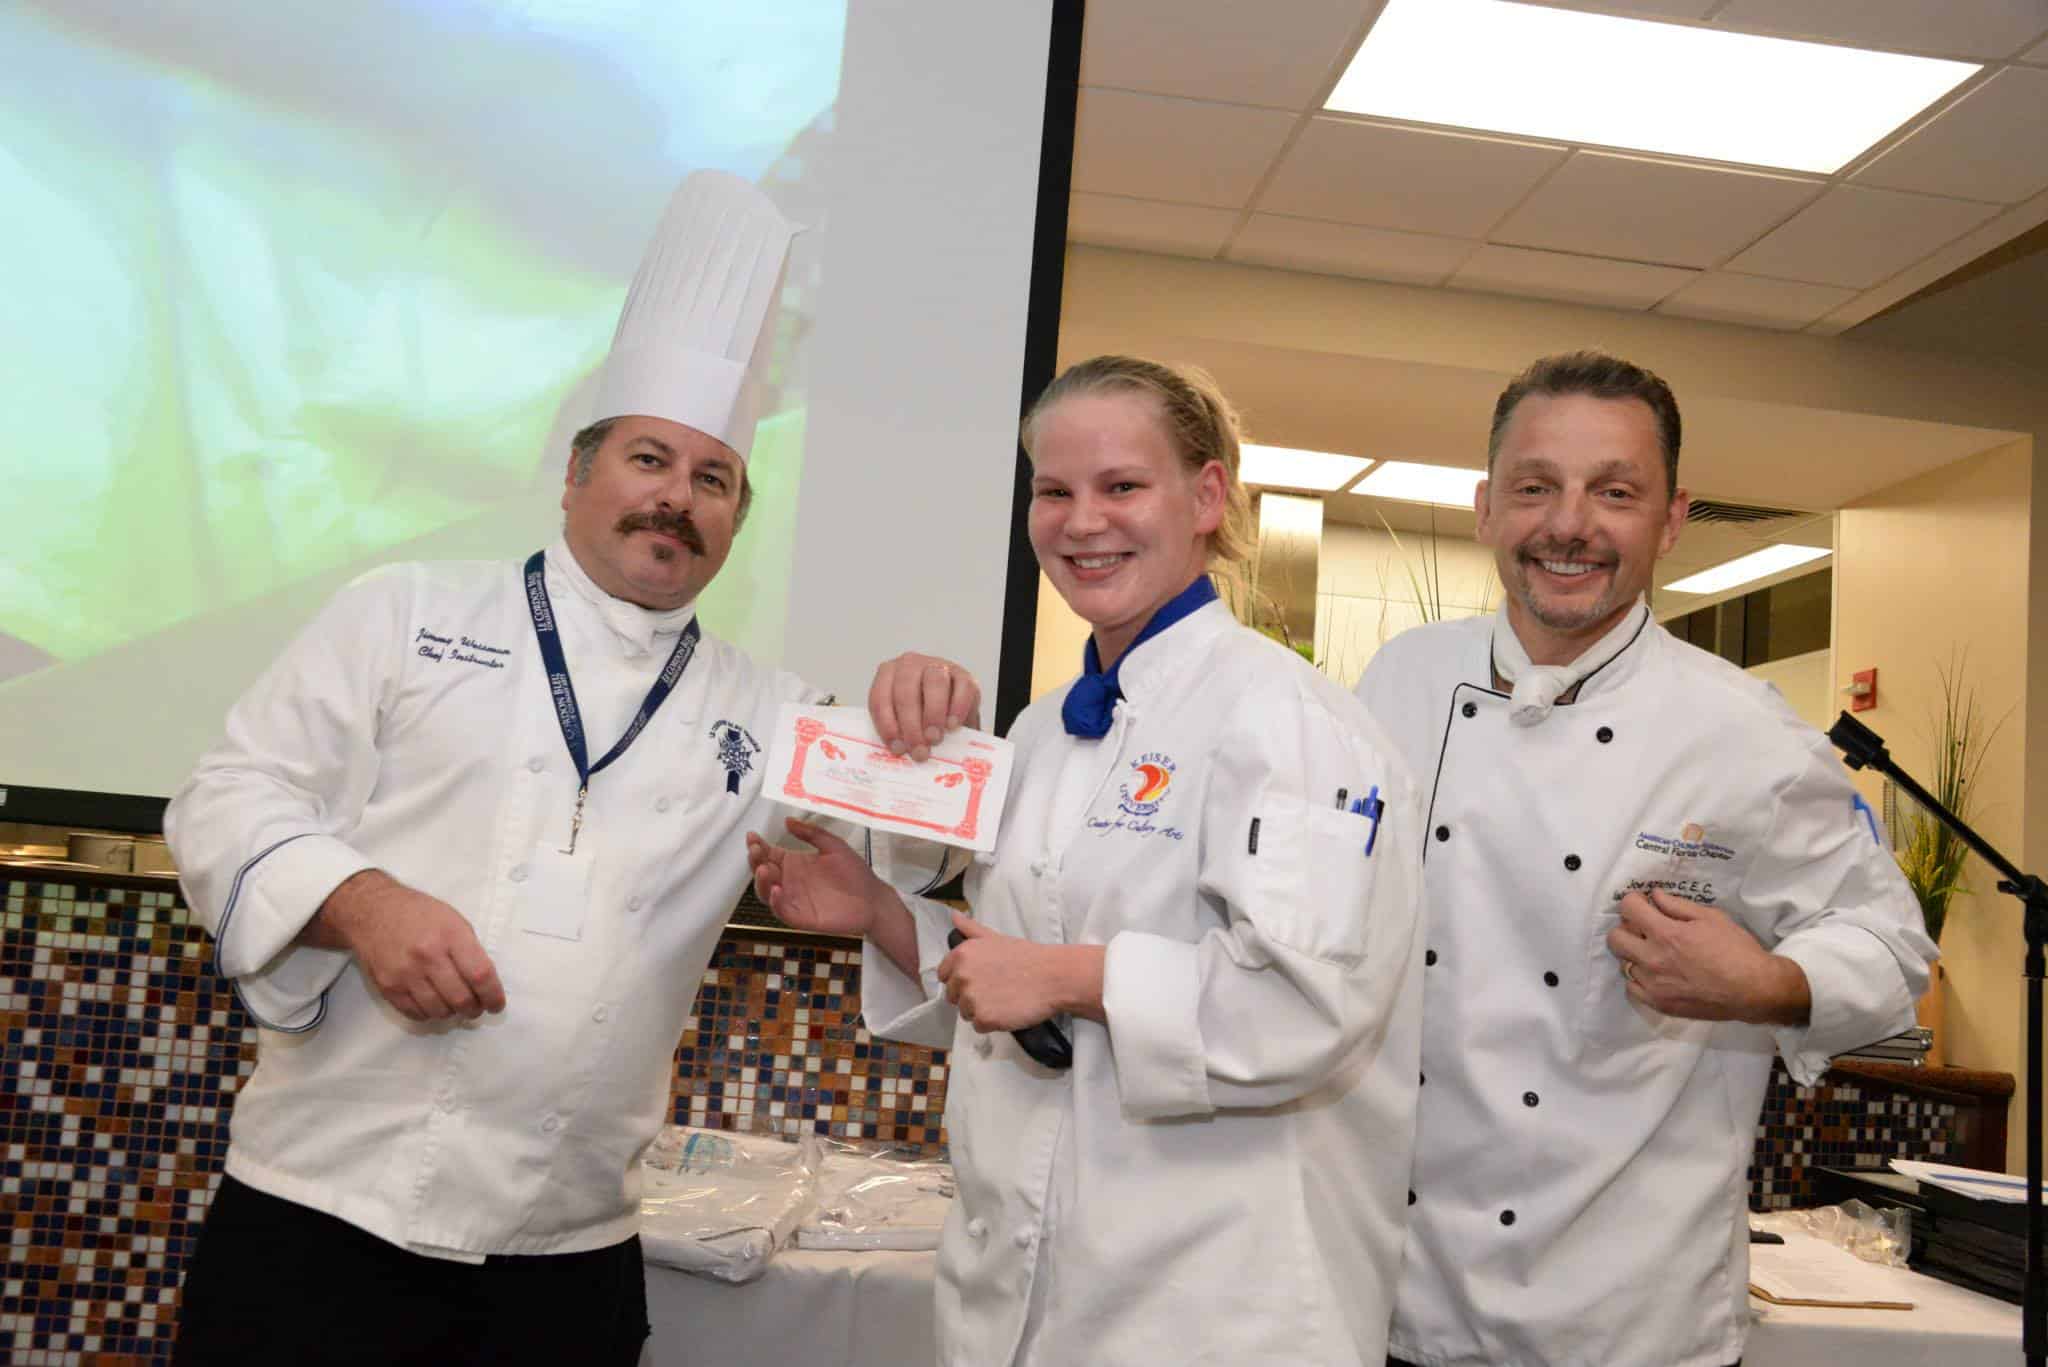 Melbourne Culinary Students Attend Central Florida Chapter of the American Culinary Federation Meeting